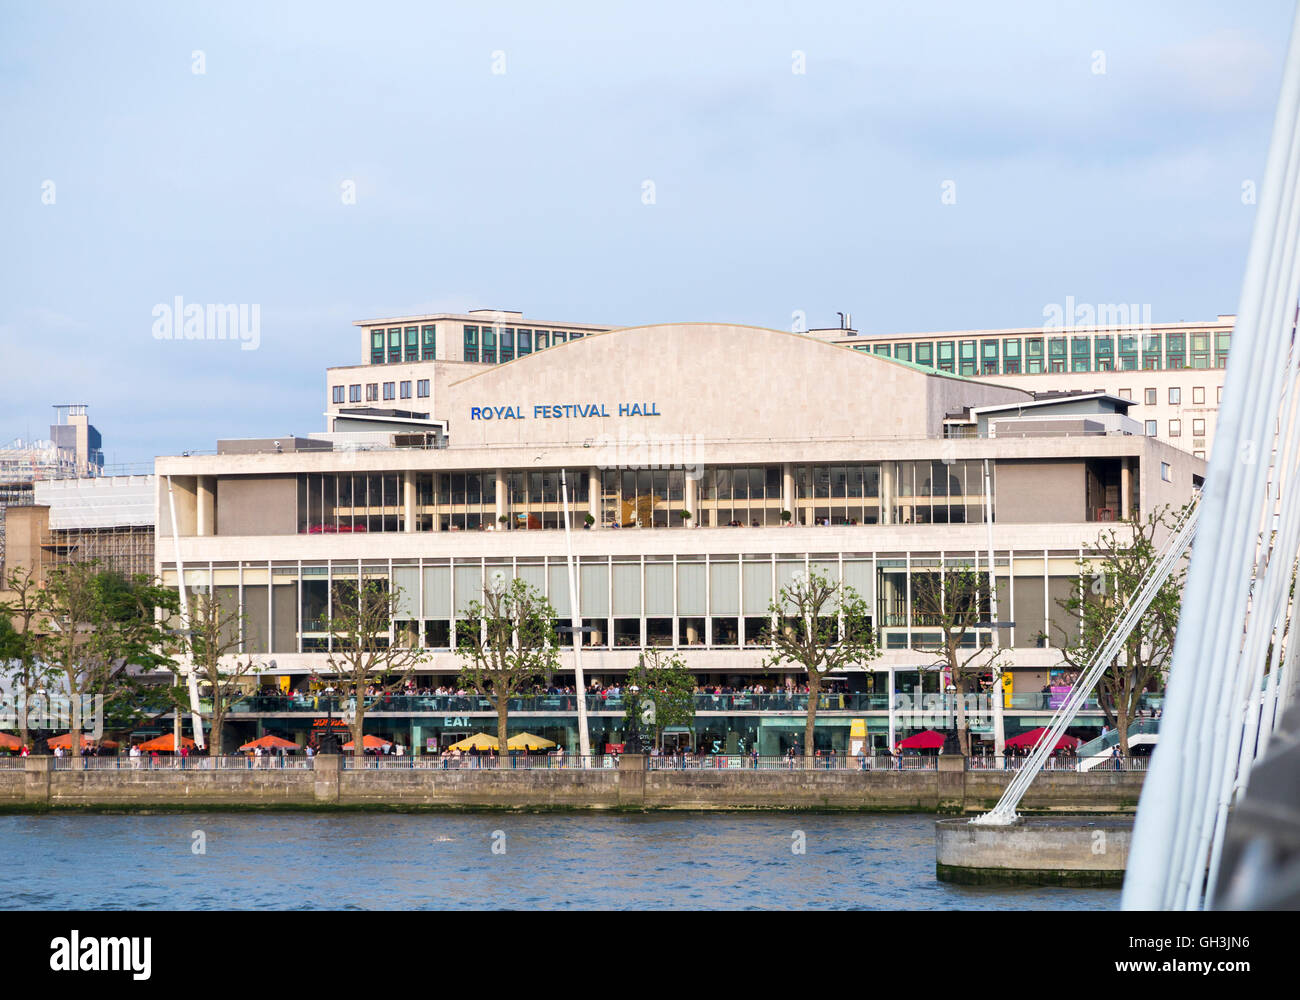 Royal Festival Hall, Southbank Centre, on the South Bank of the River Thames, London, UK on a sunny day with blue sky Stock Photo